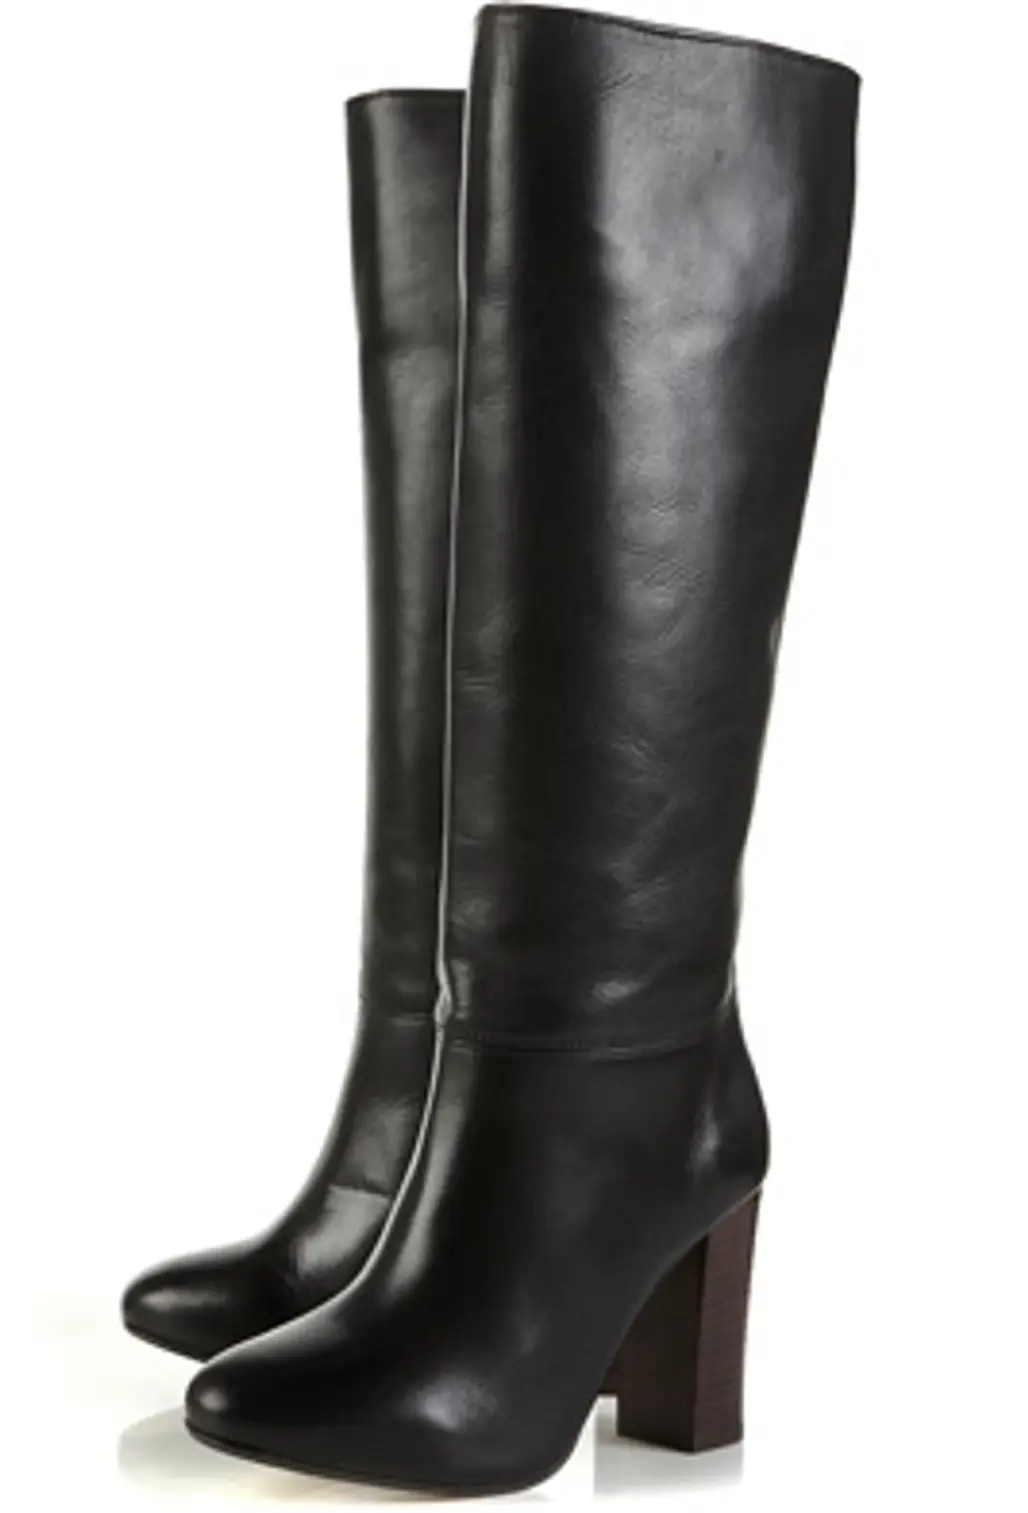 Topshop Baby 70s Leather High Leg Boot